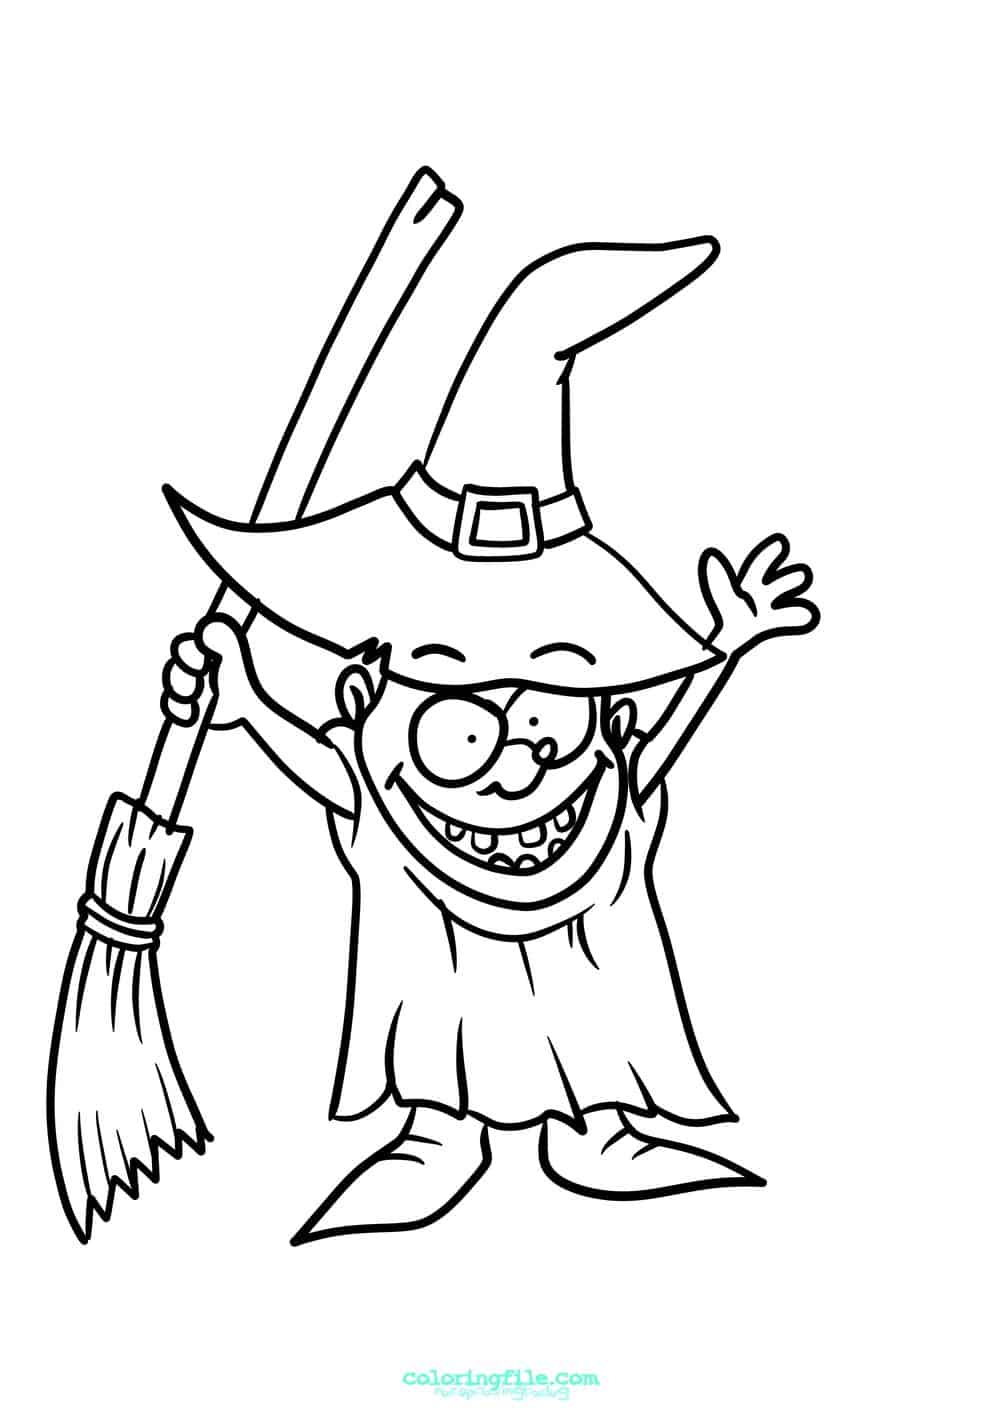 Funny halloween coloring pages